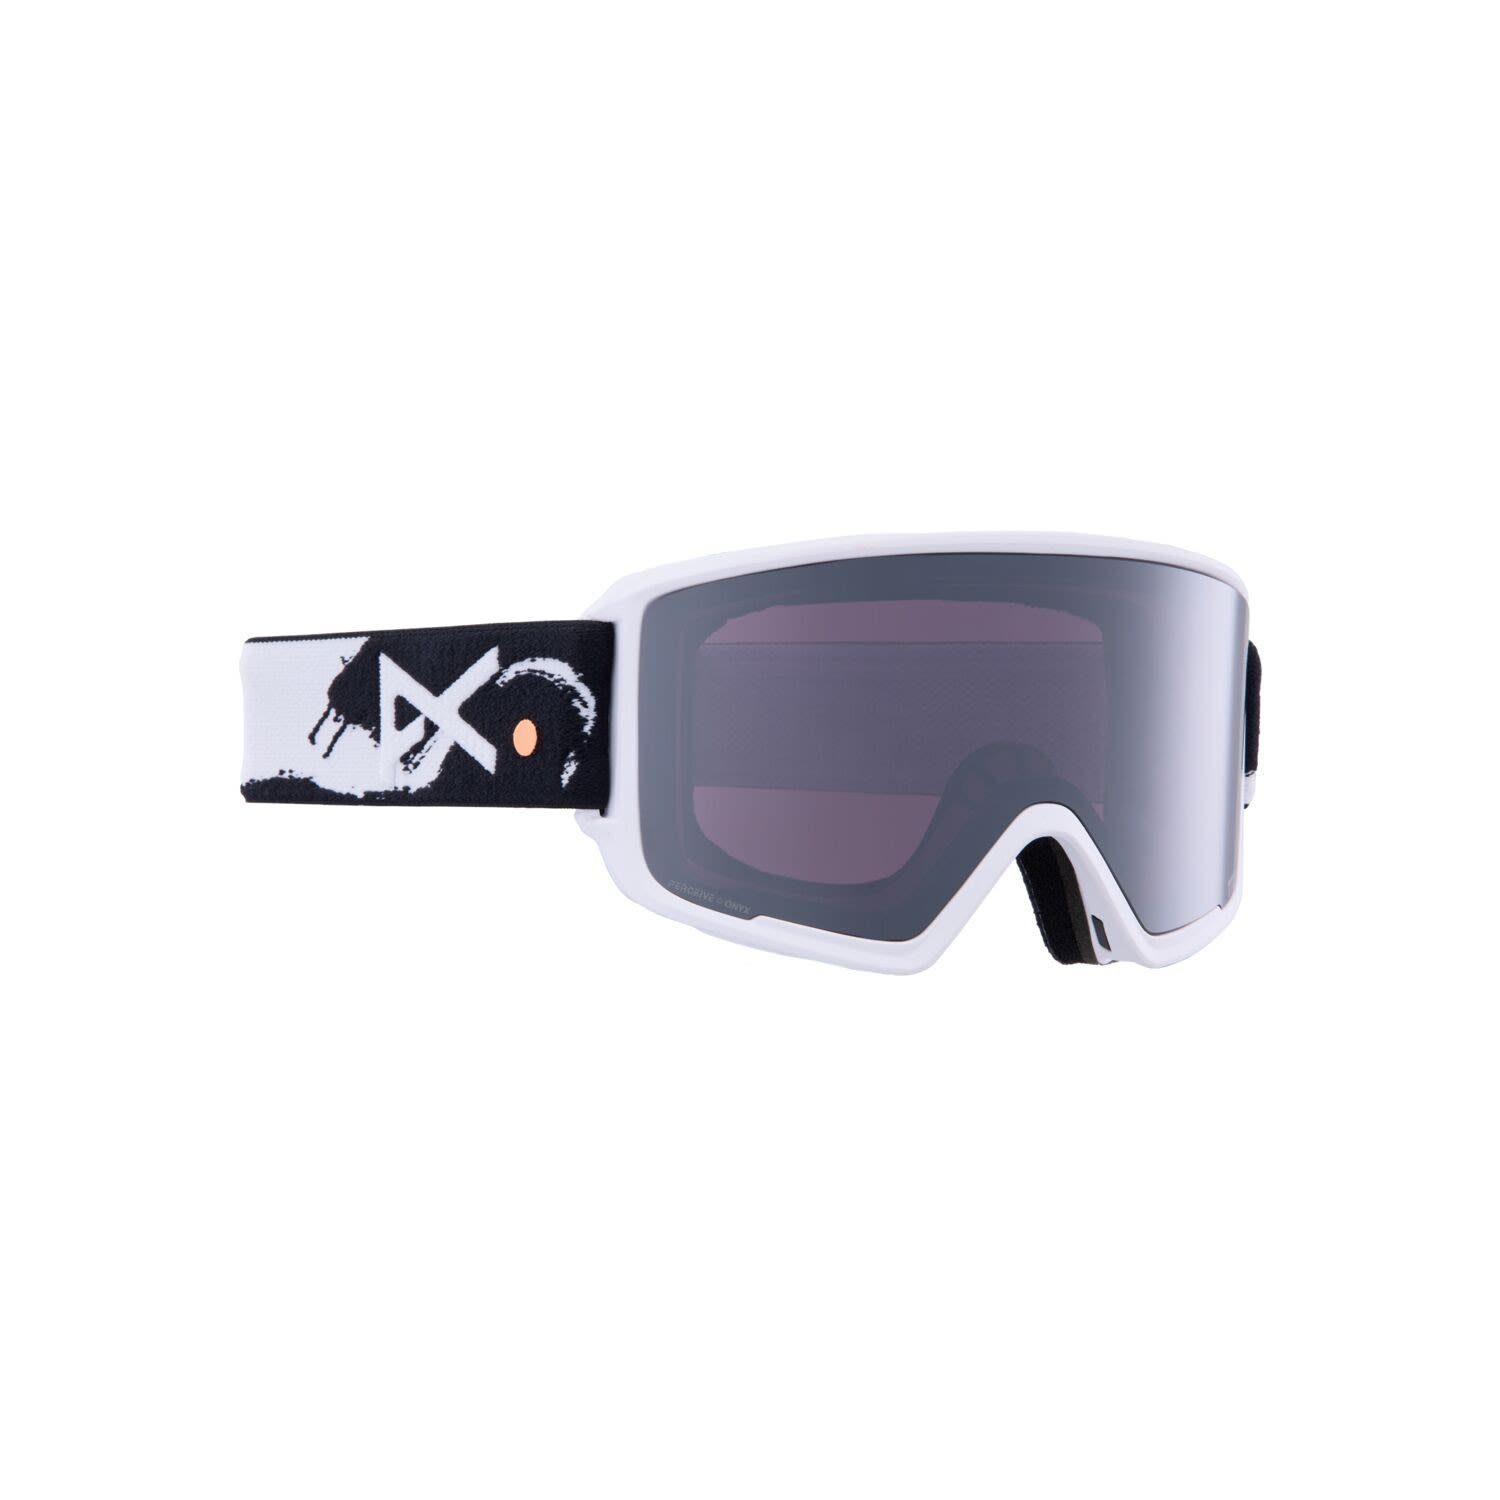 Anon Skibrille Anon M M3 Mfi With Spare Lens Herren Accessoires fytree/prcv sun onyx